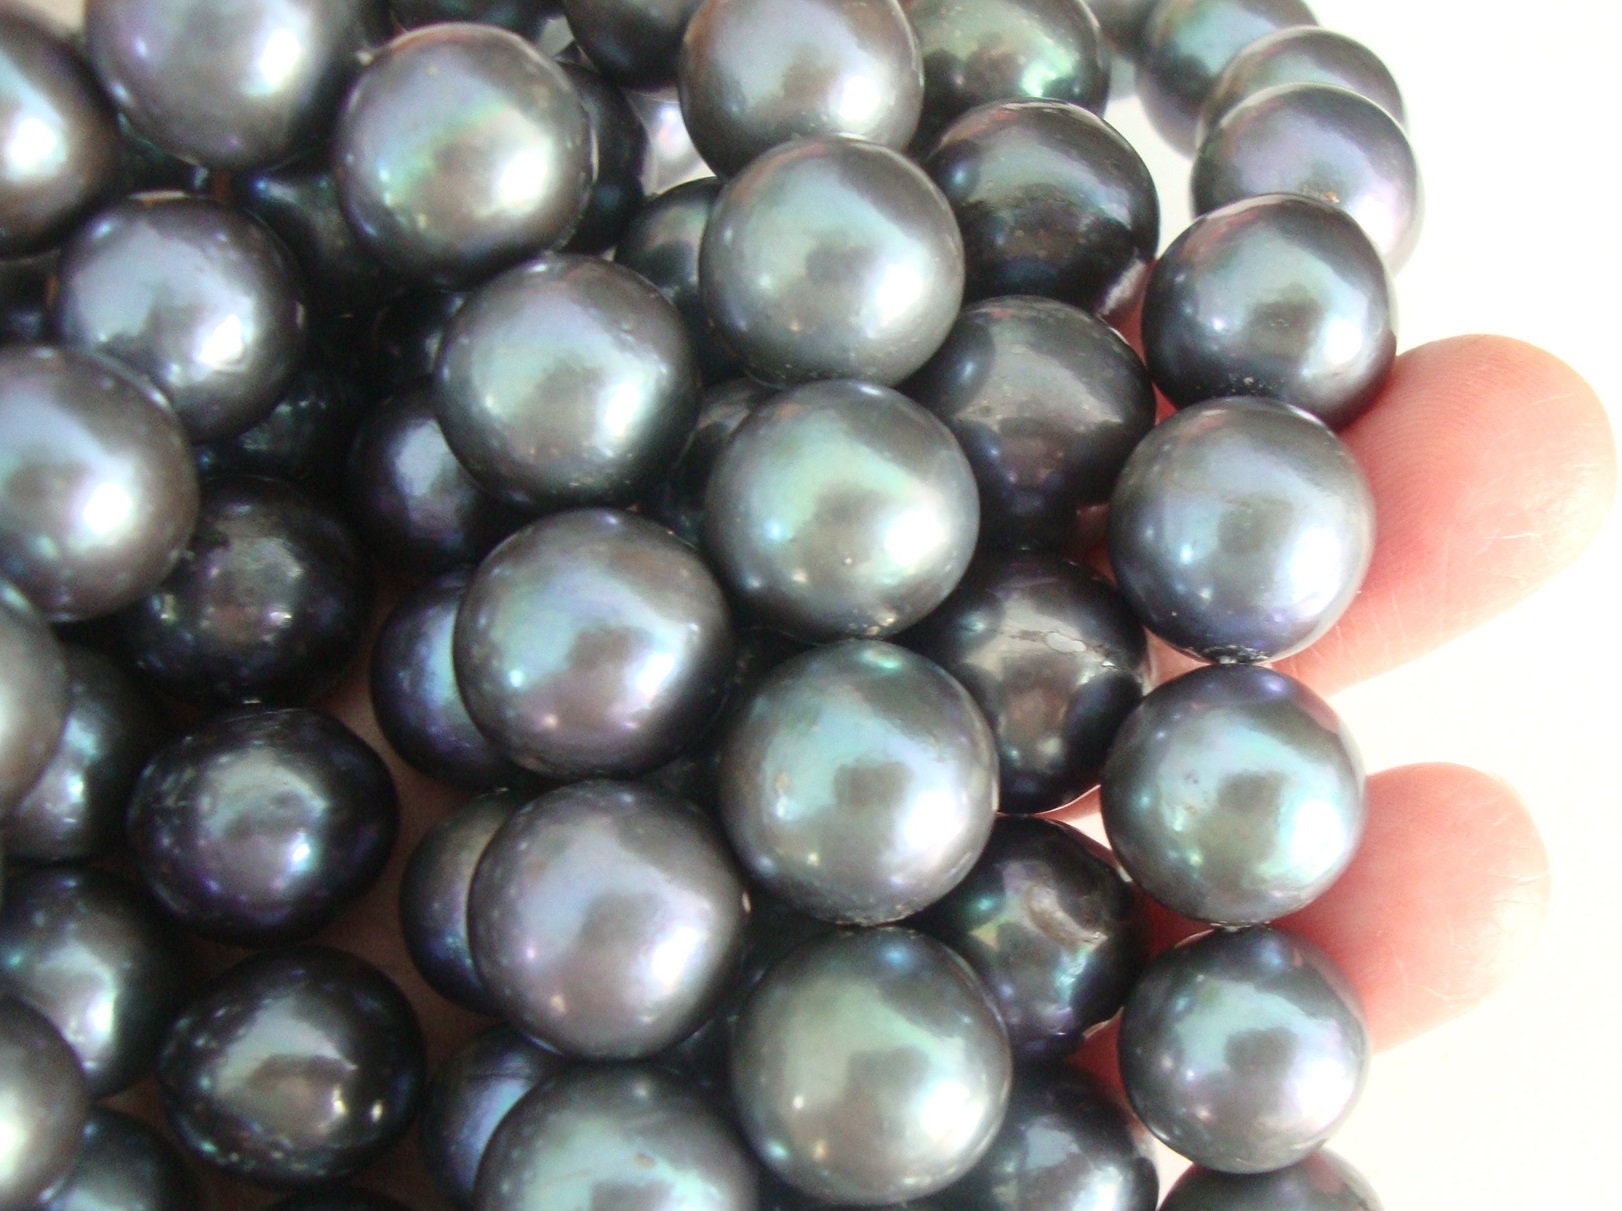 Loose Asymmetrical Nucleated Pearls Undrilled Half or Fully Drilled